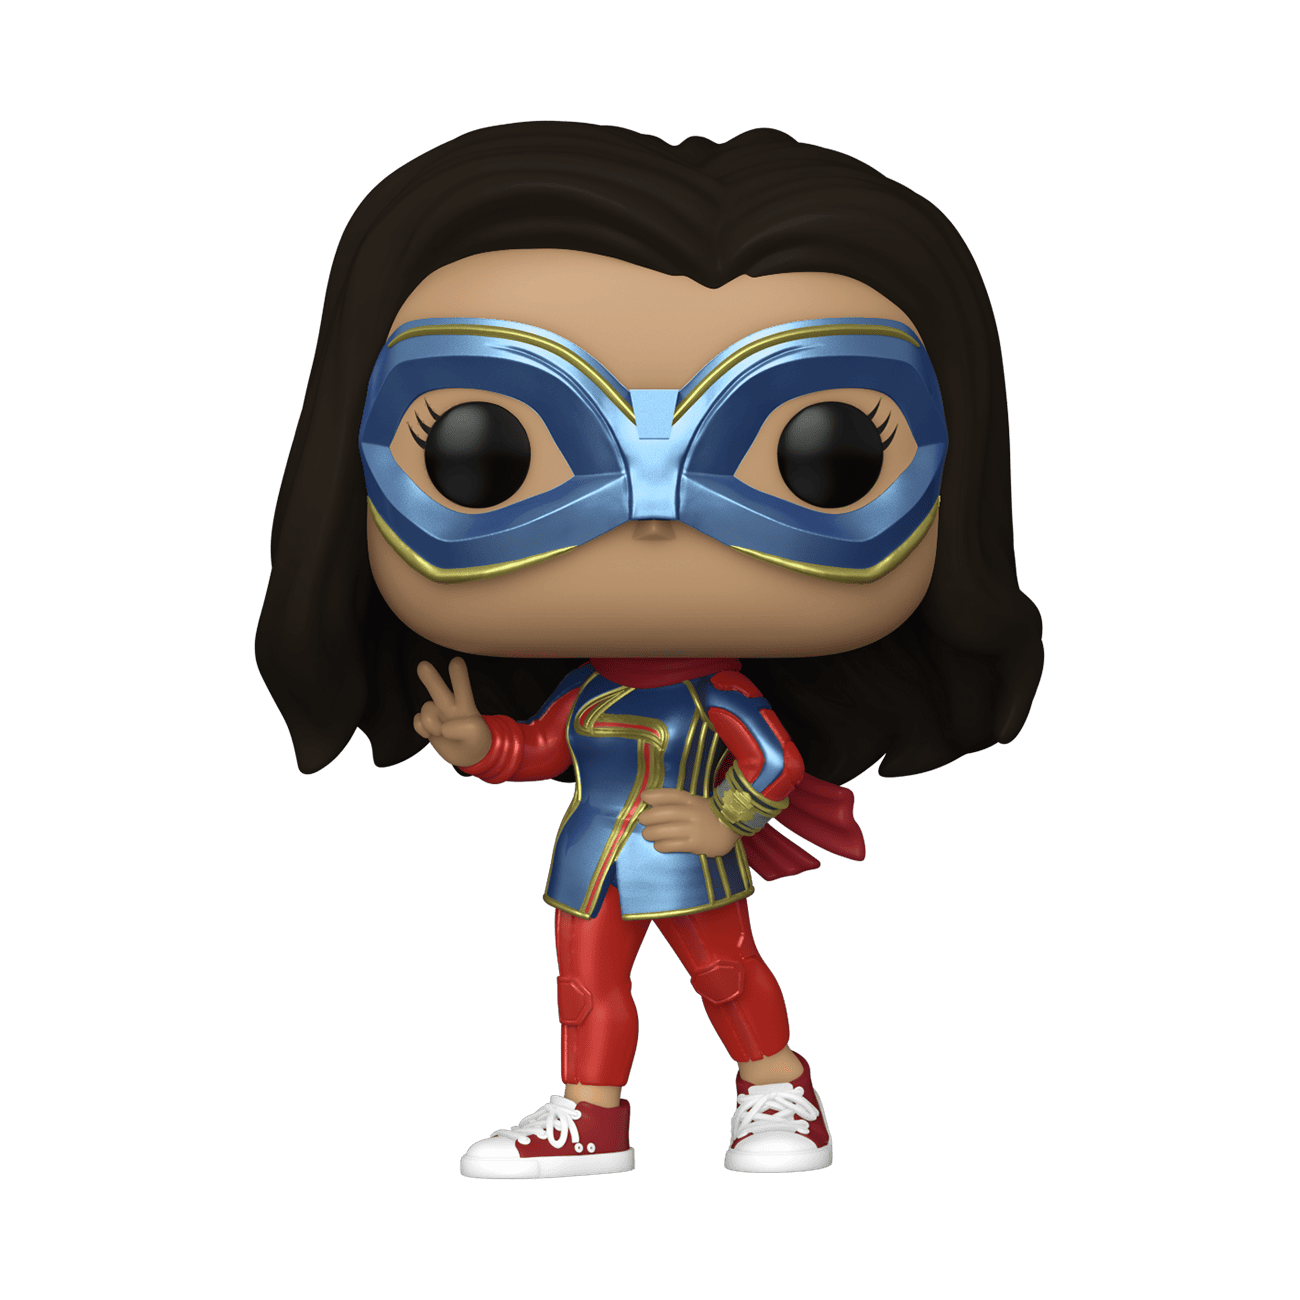 Buy Pop! Ms. Marvel with Peace Sign at Funko.